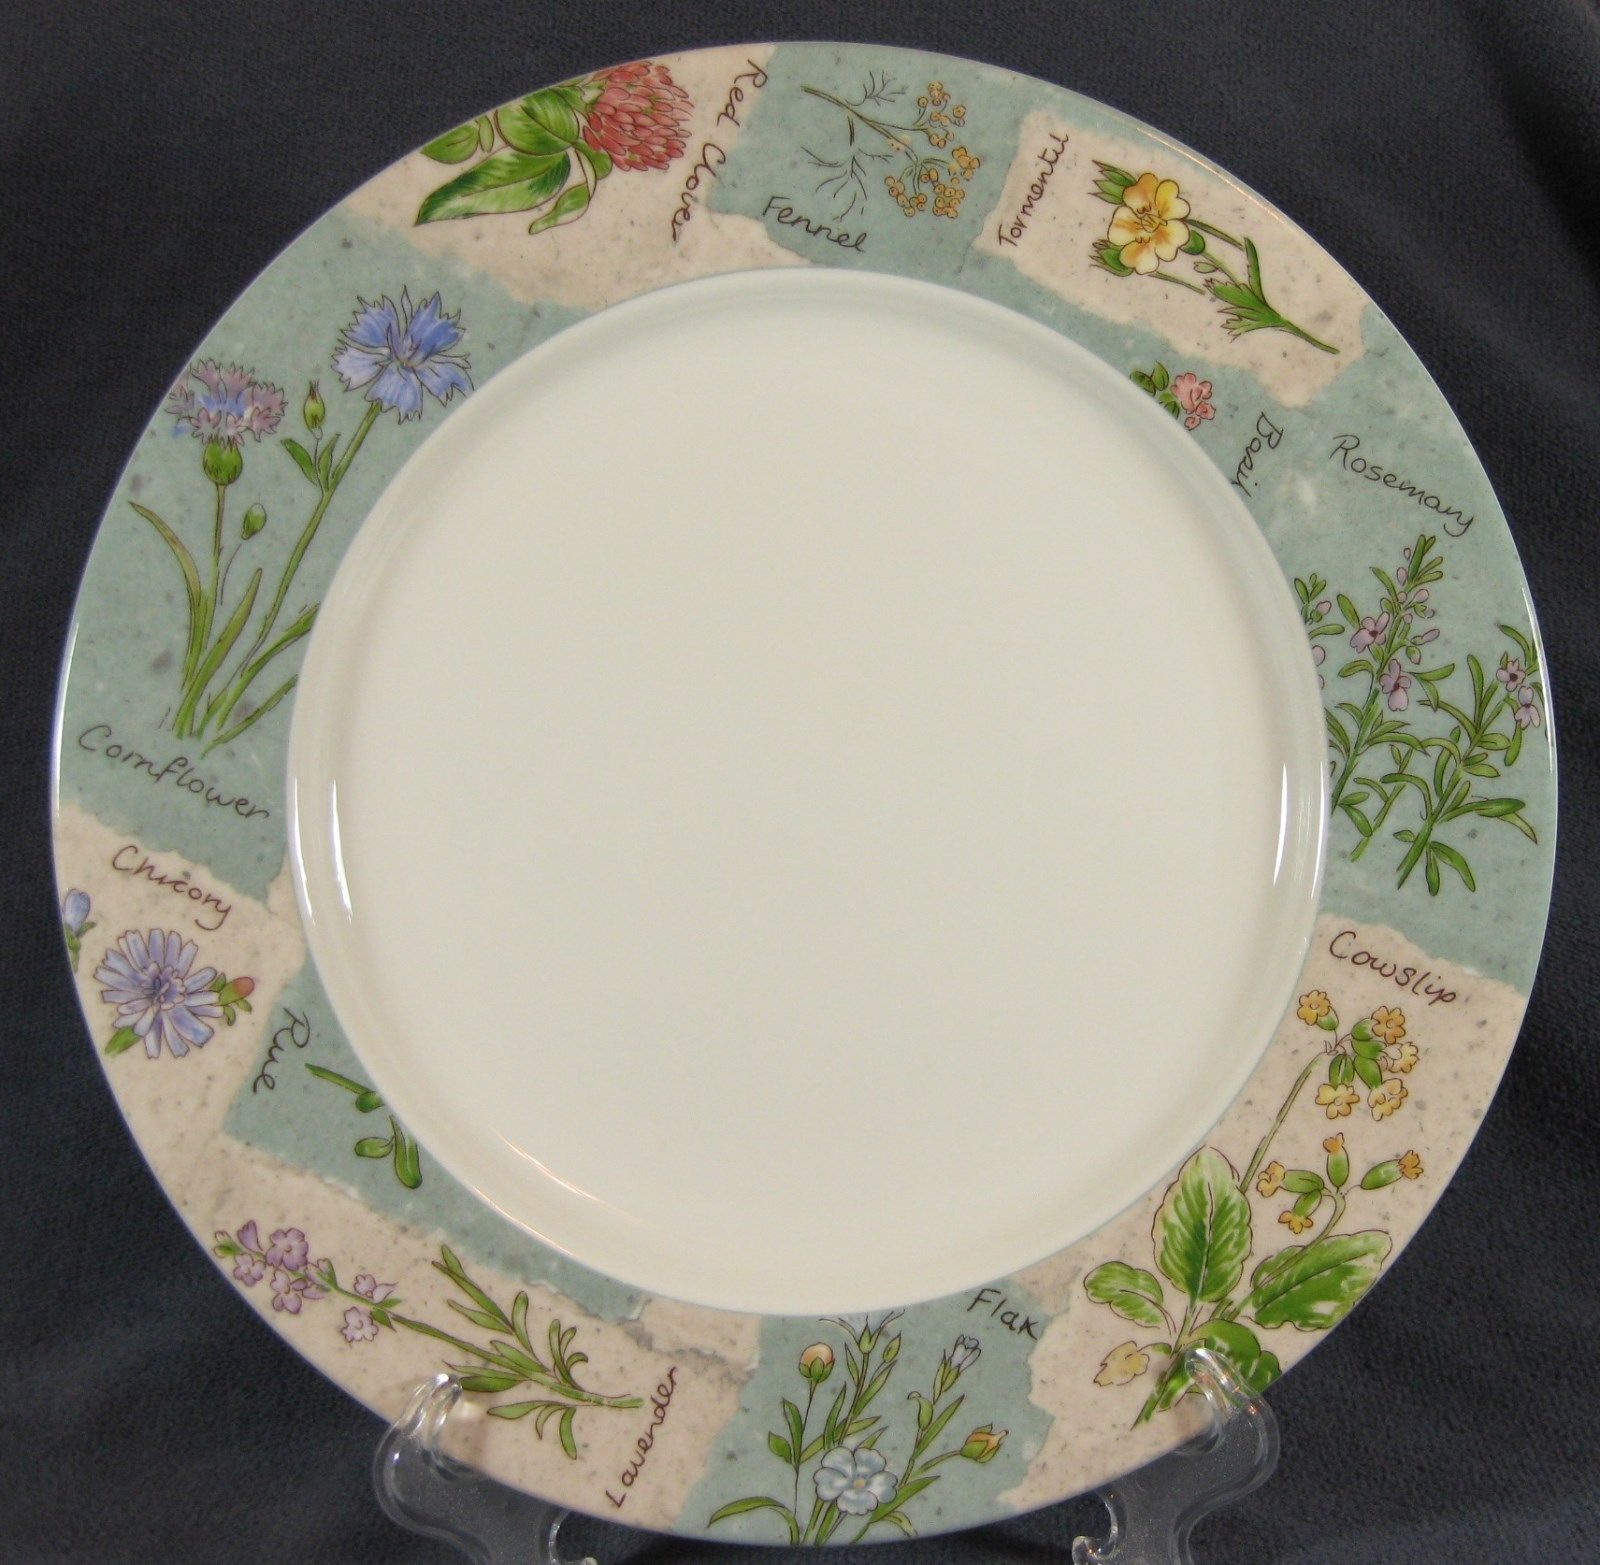 Royal Doulton Multicolored Mayfair H4897 Bread and Butter Plate s 